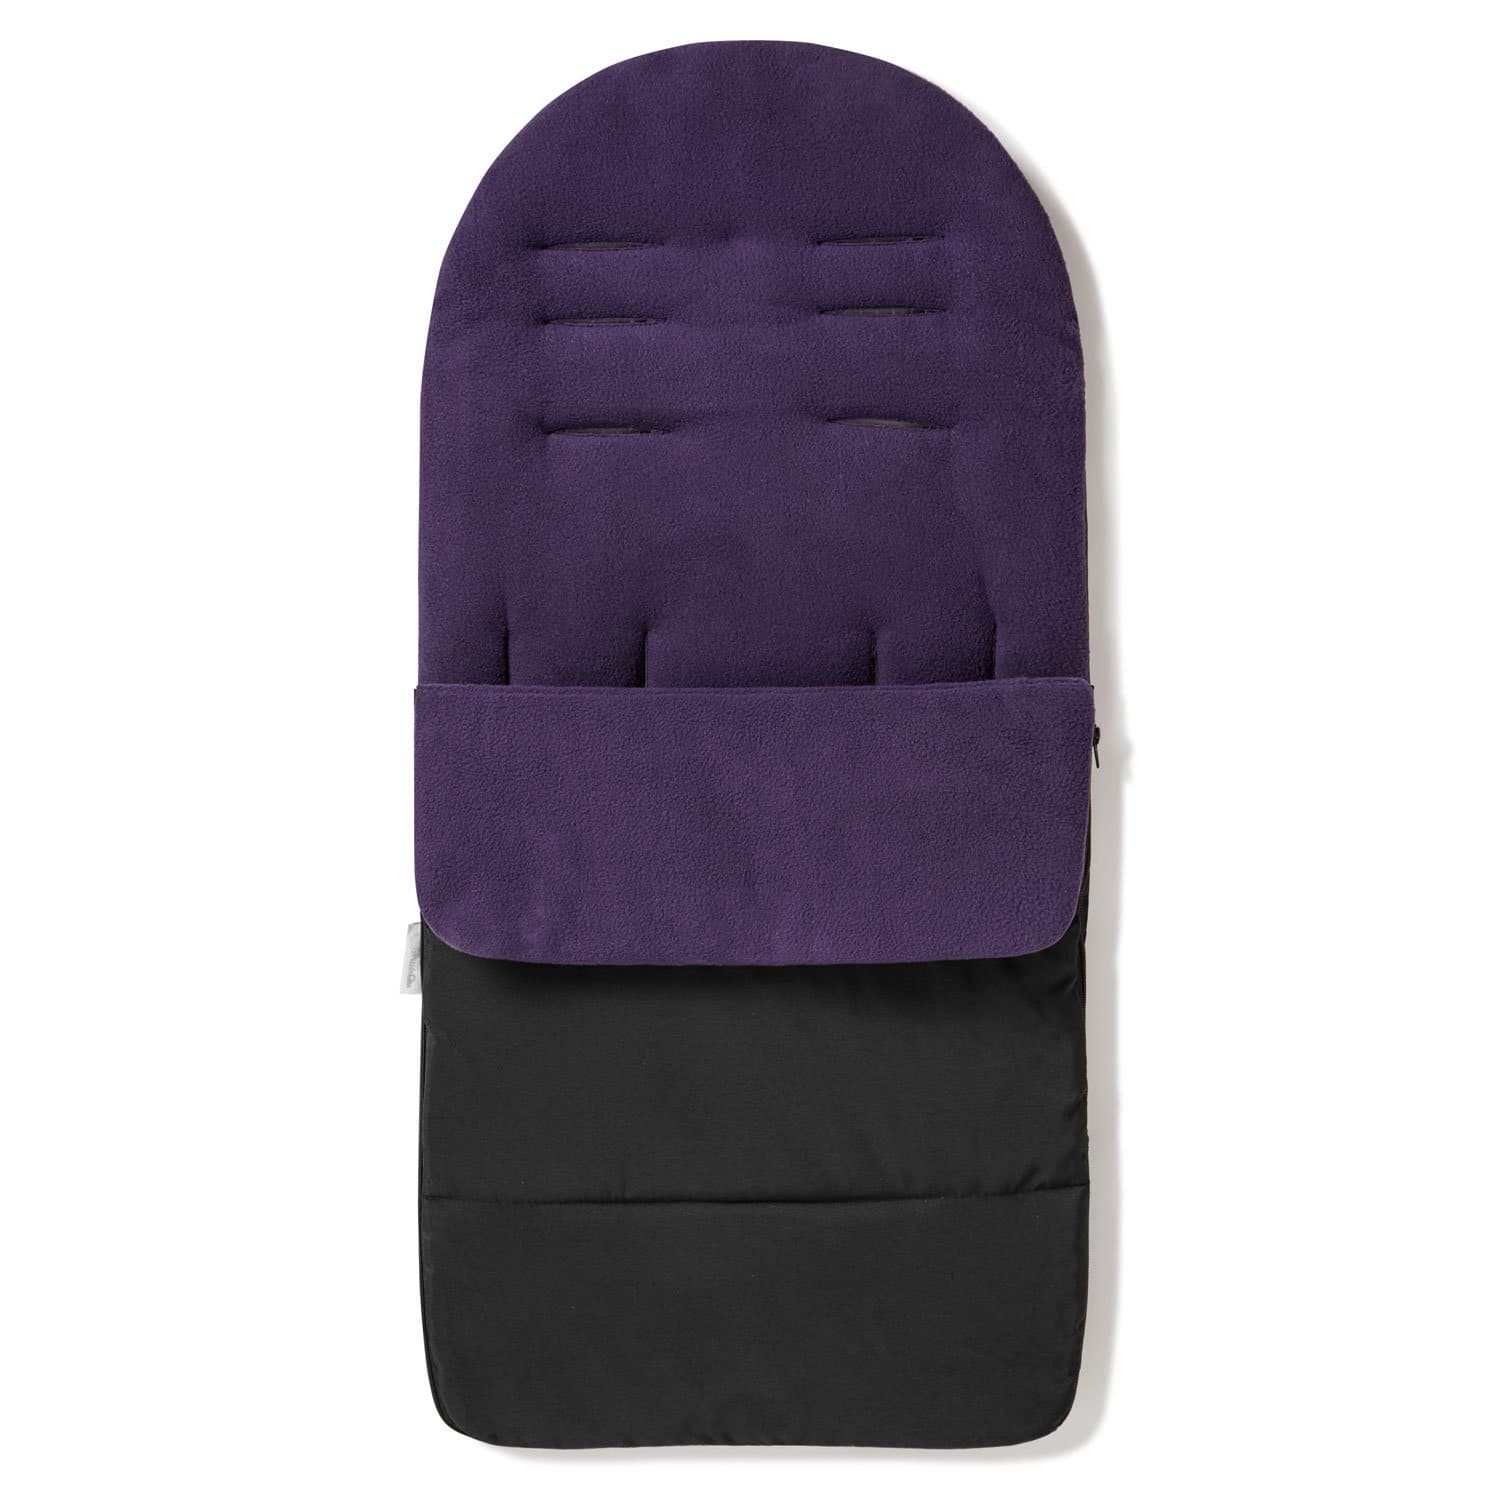 Premium Footmuff / Cosy Toes Compatible with My Babiie - Plum Purple / Fits All Models | For Your Little One